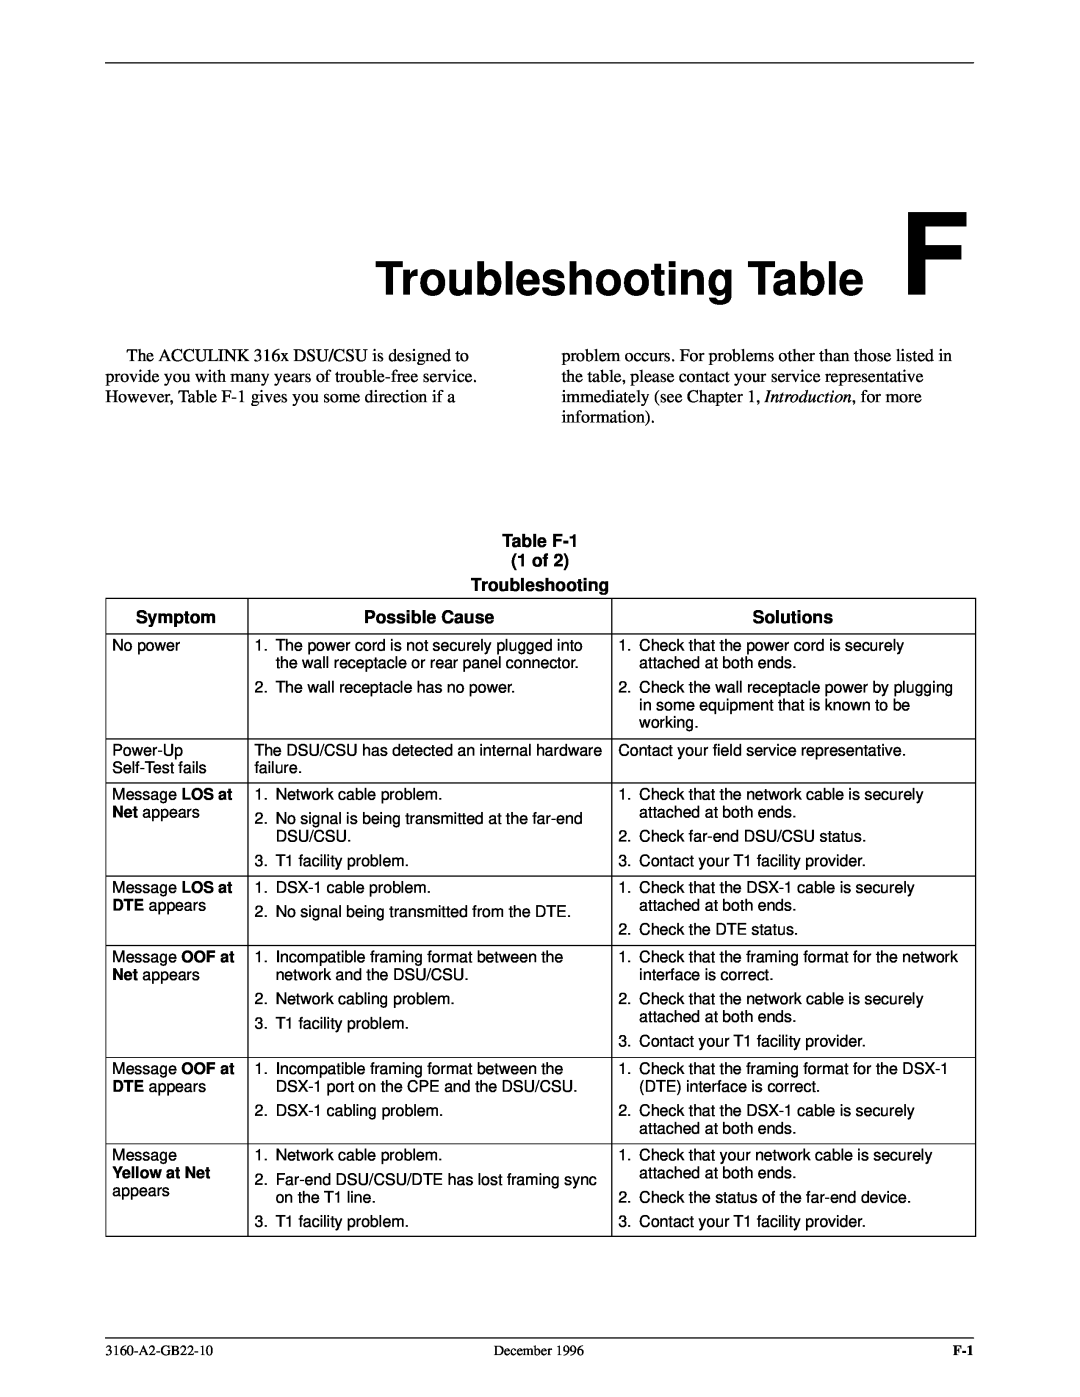 Paradyne 316x manual Troubleshooting Table F, Table F-1 1 of Troubleshooting, Symptom, Possible Cause, Solutions 